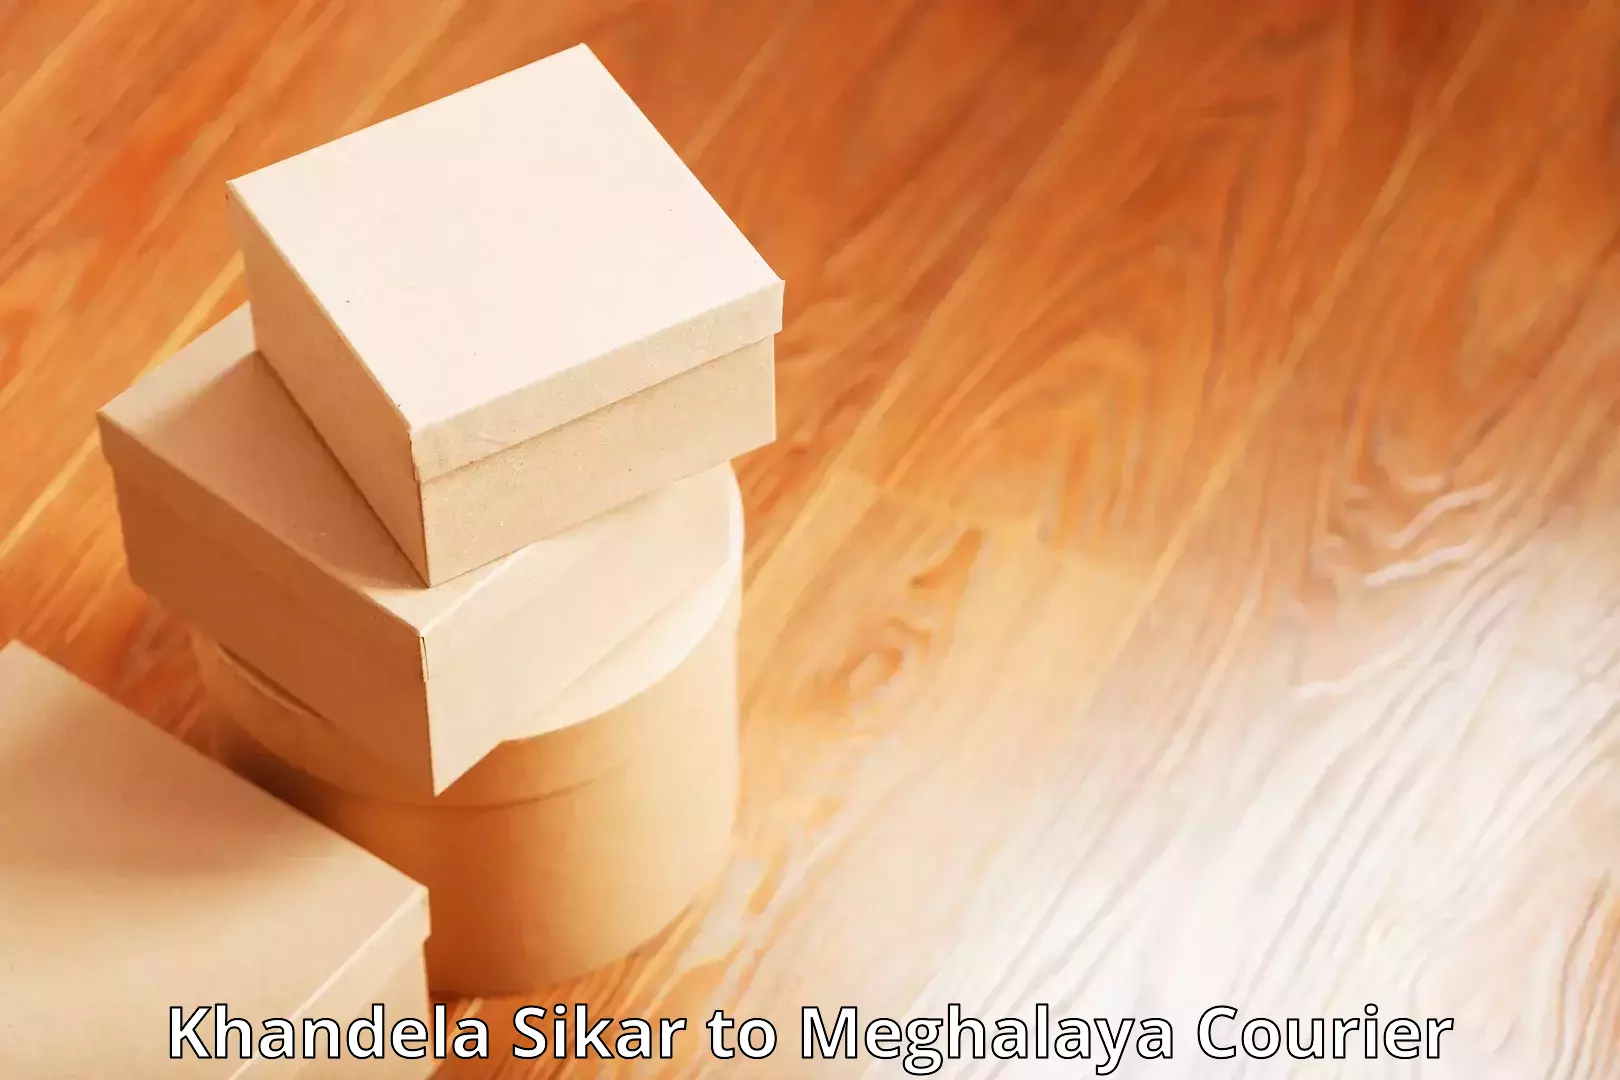 Discount courier rates Khandela Sikar to Tura